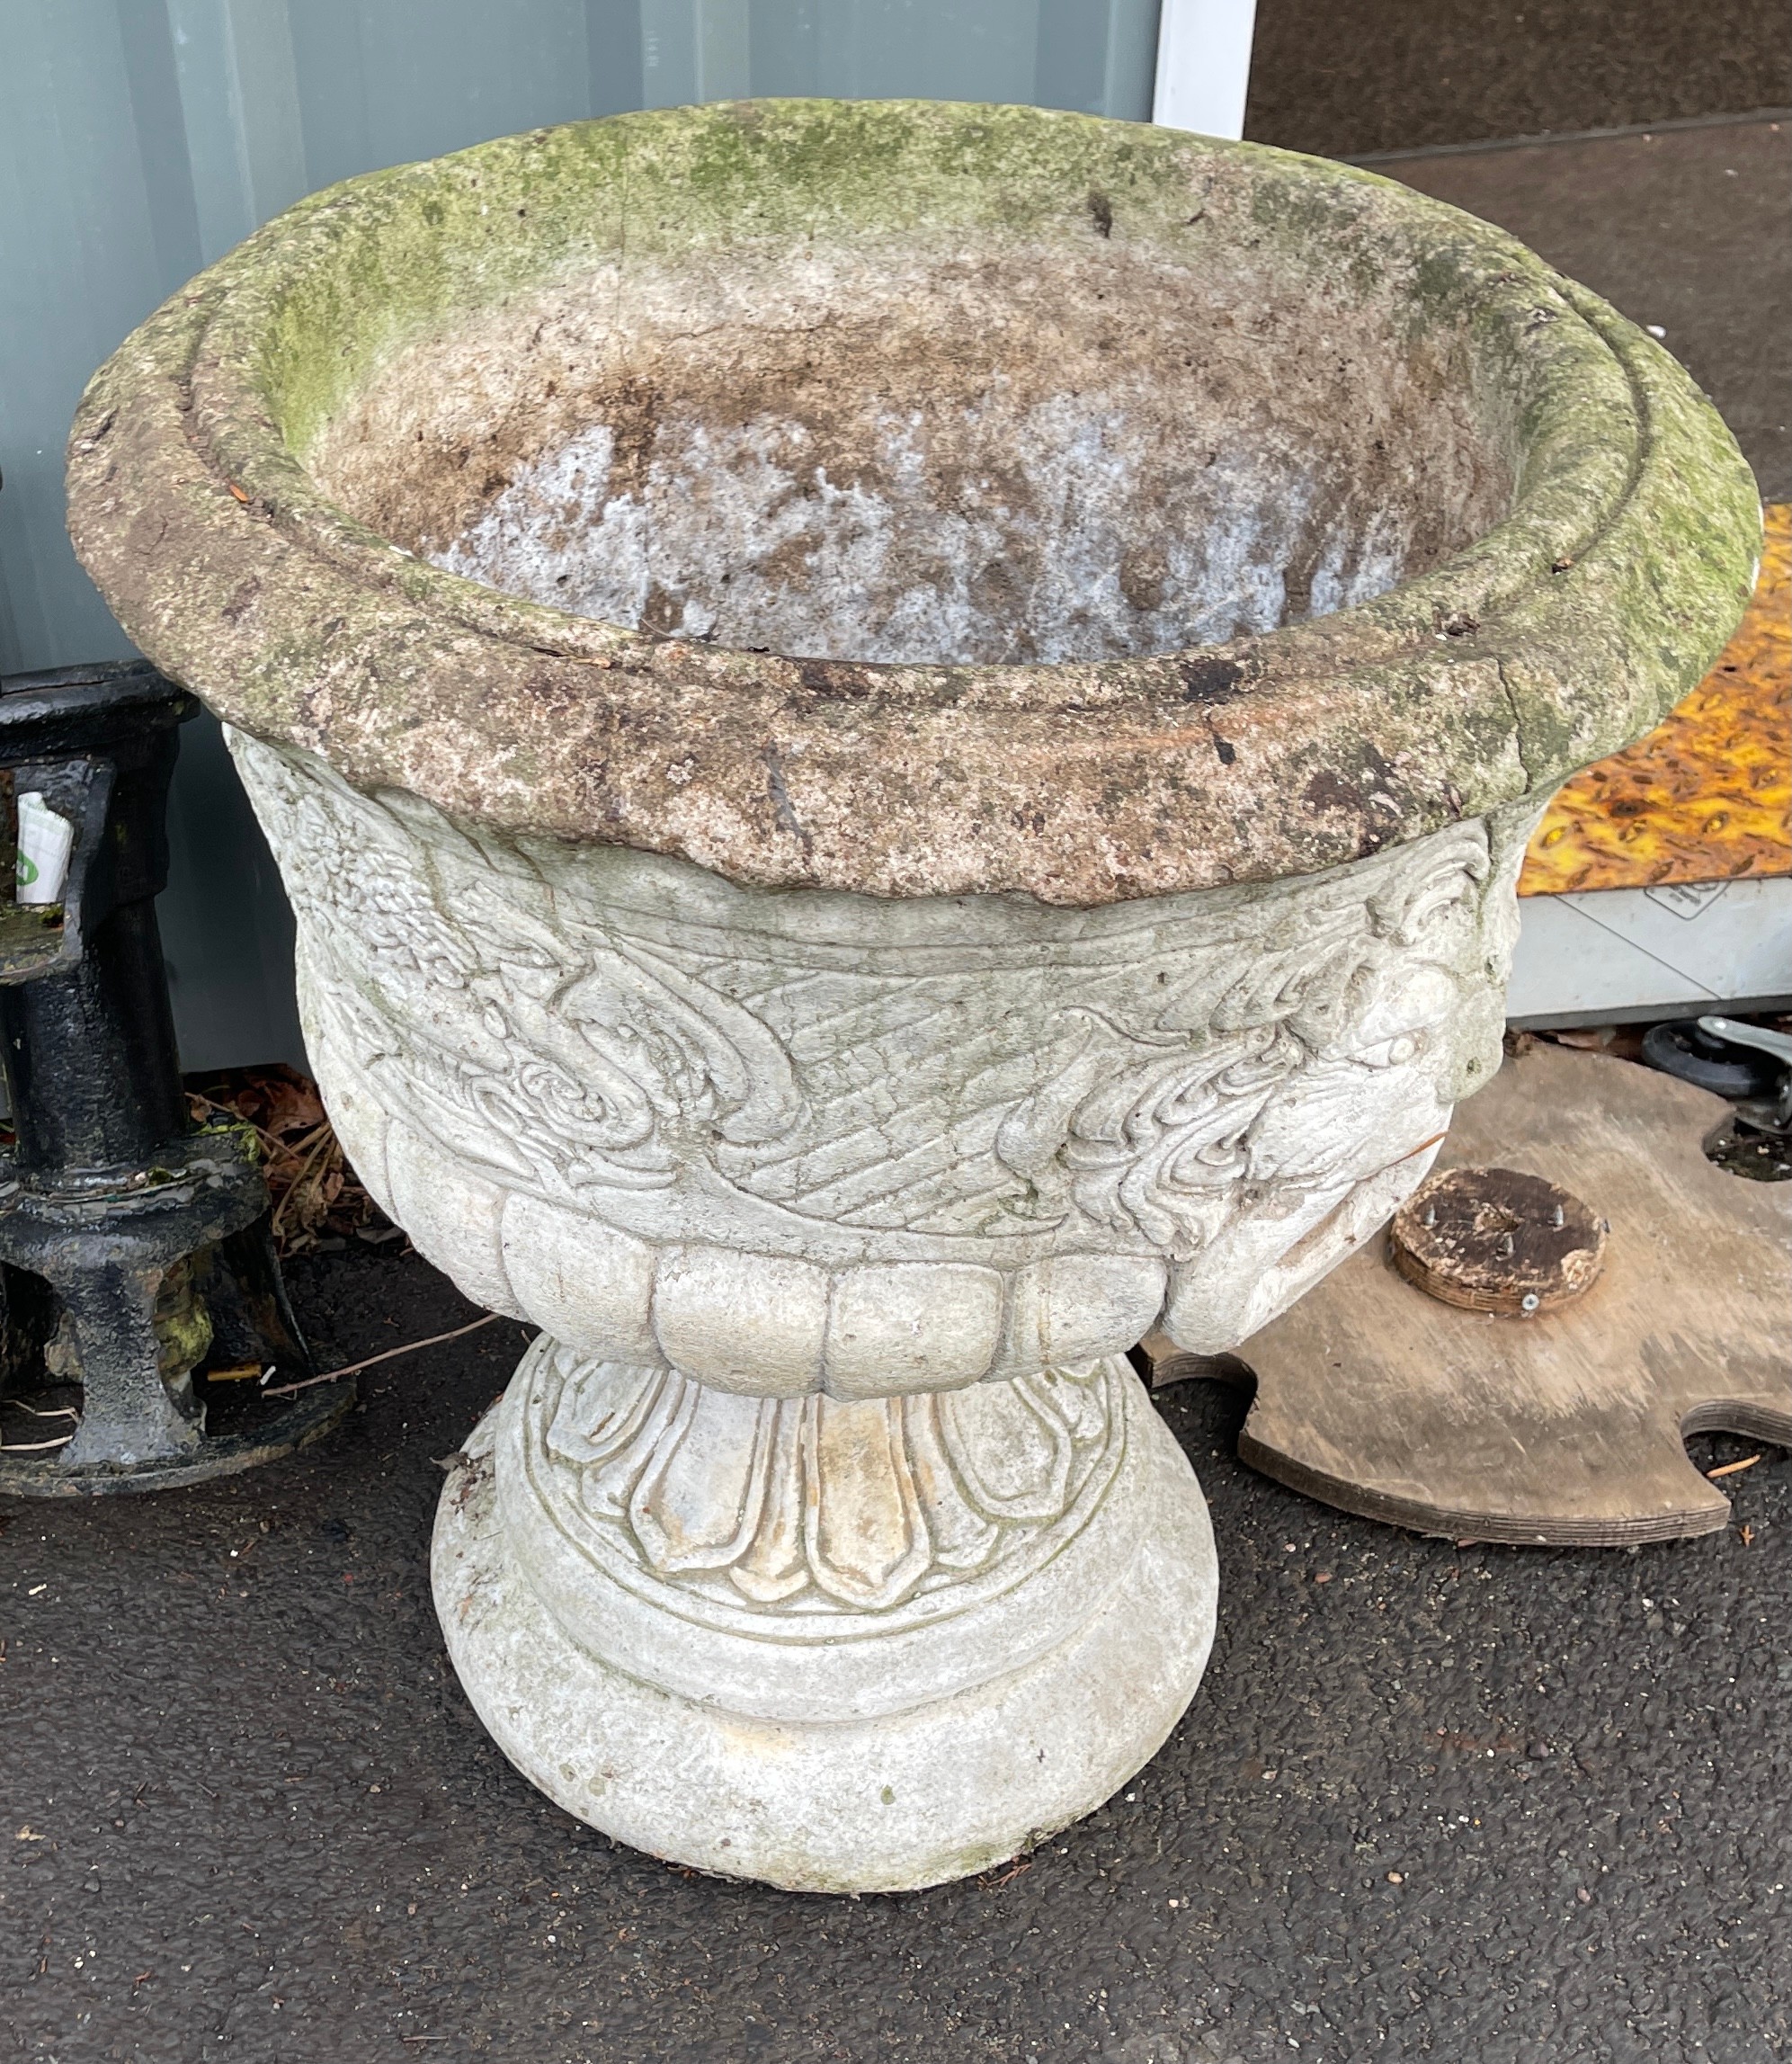 2 piece stone planter, height 25 inches, Diameter 22.5 inches